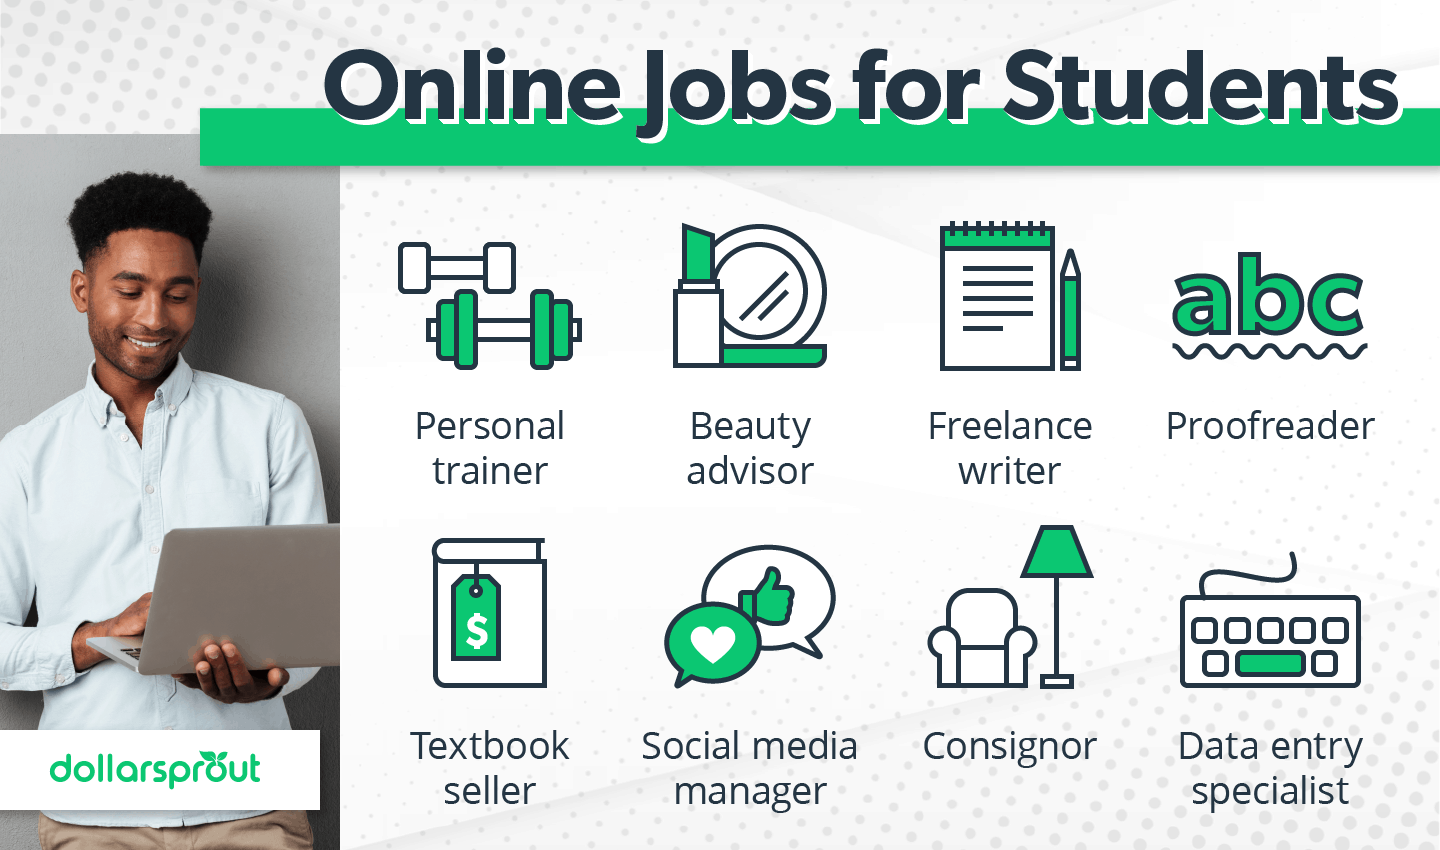 What kind of jobs can I do online